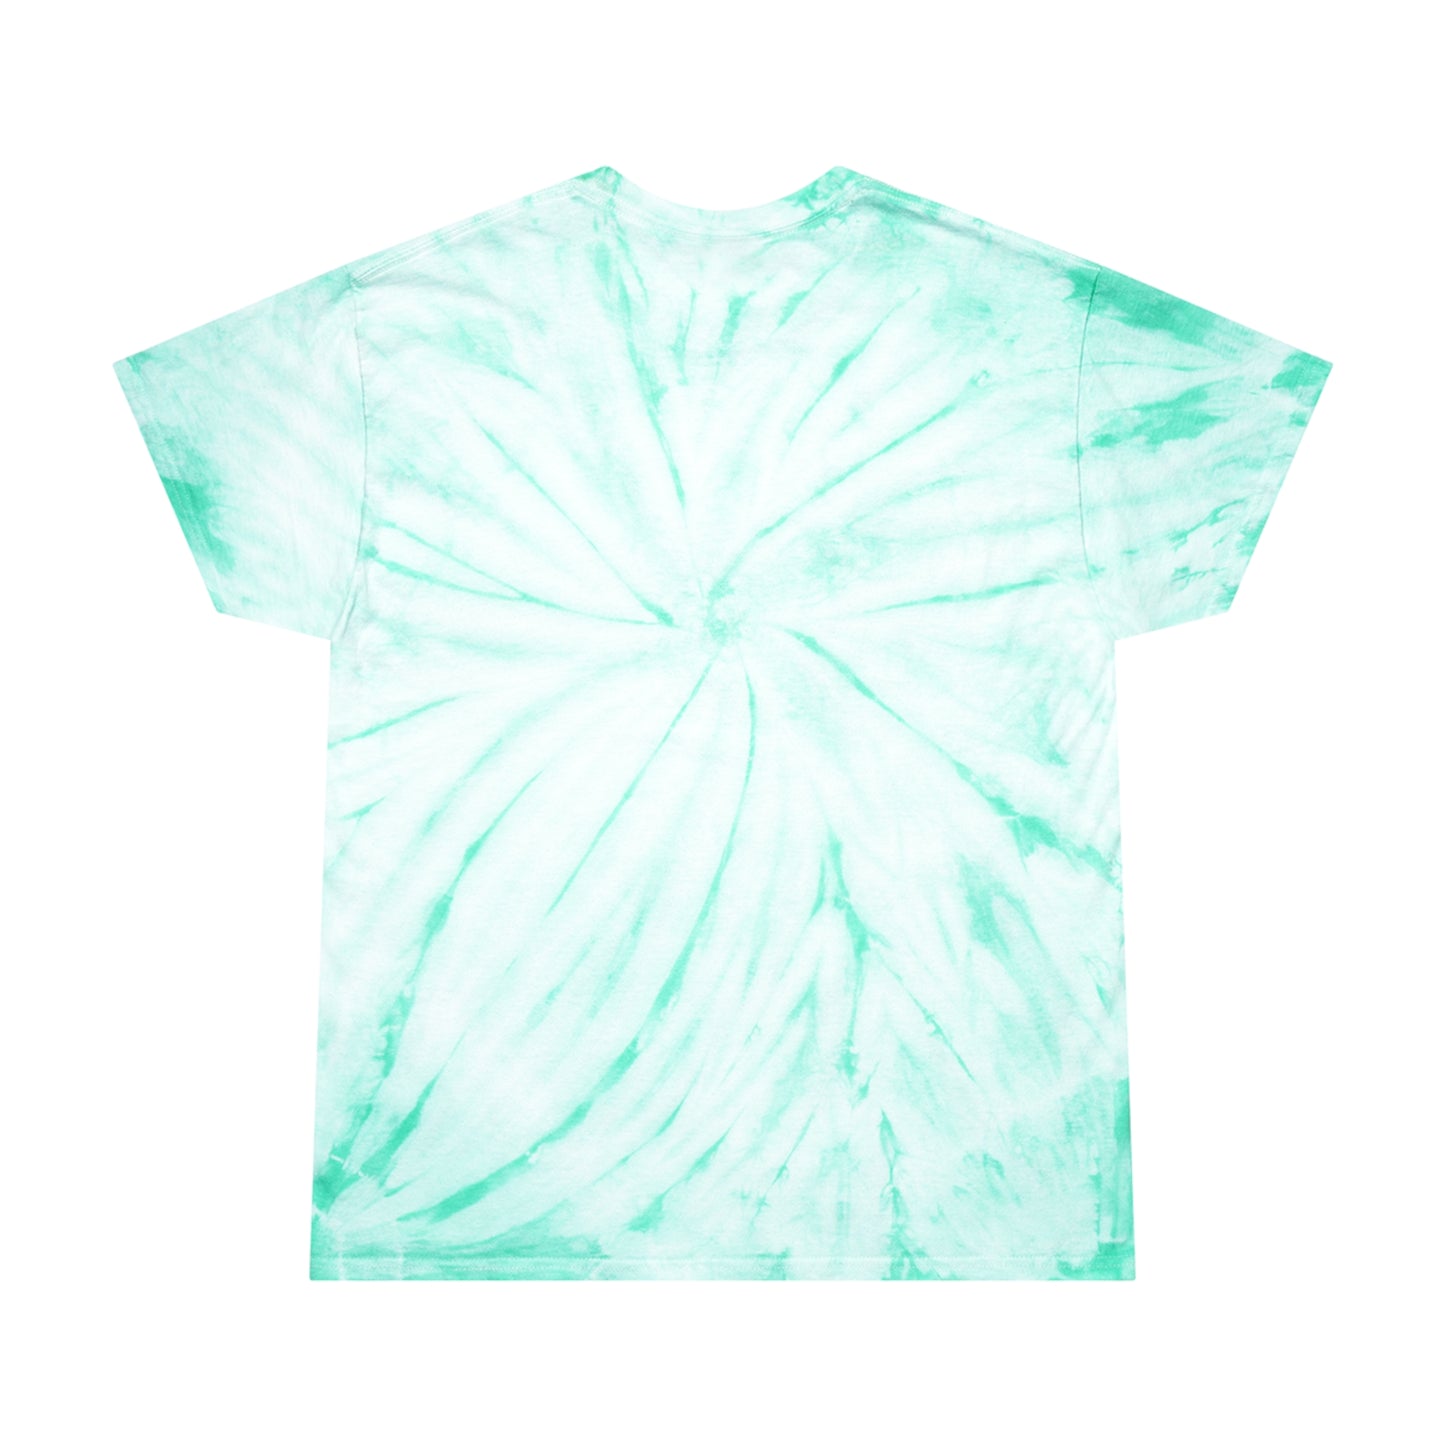 Competition Mode Activated Baton Twirler Cyclone Tie-Dye Tee, Birthday Gift for Twirler Daughter